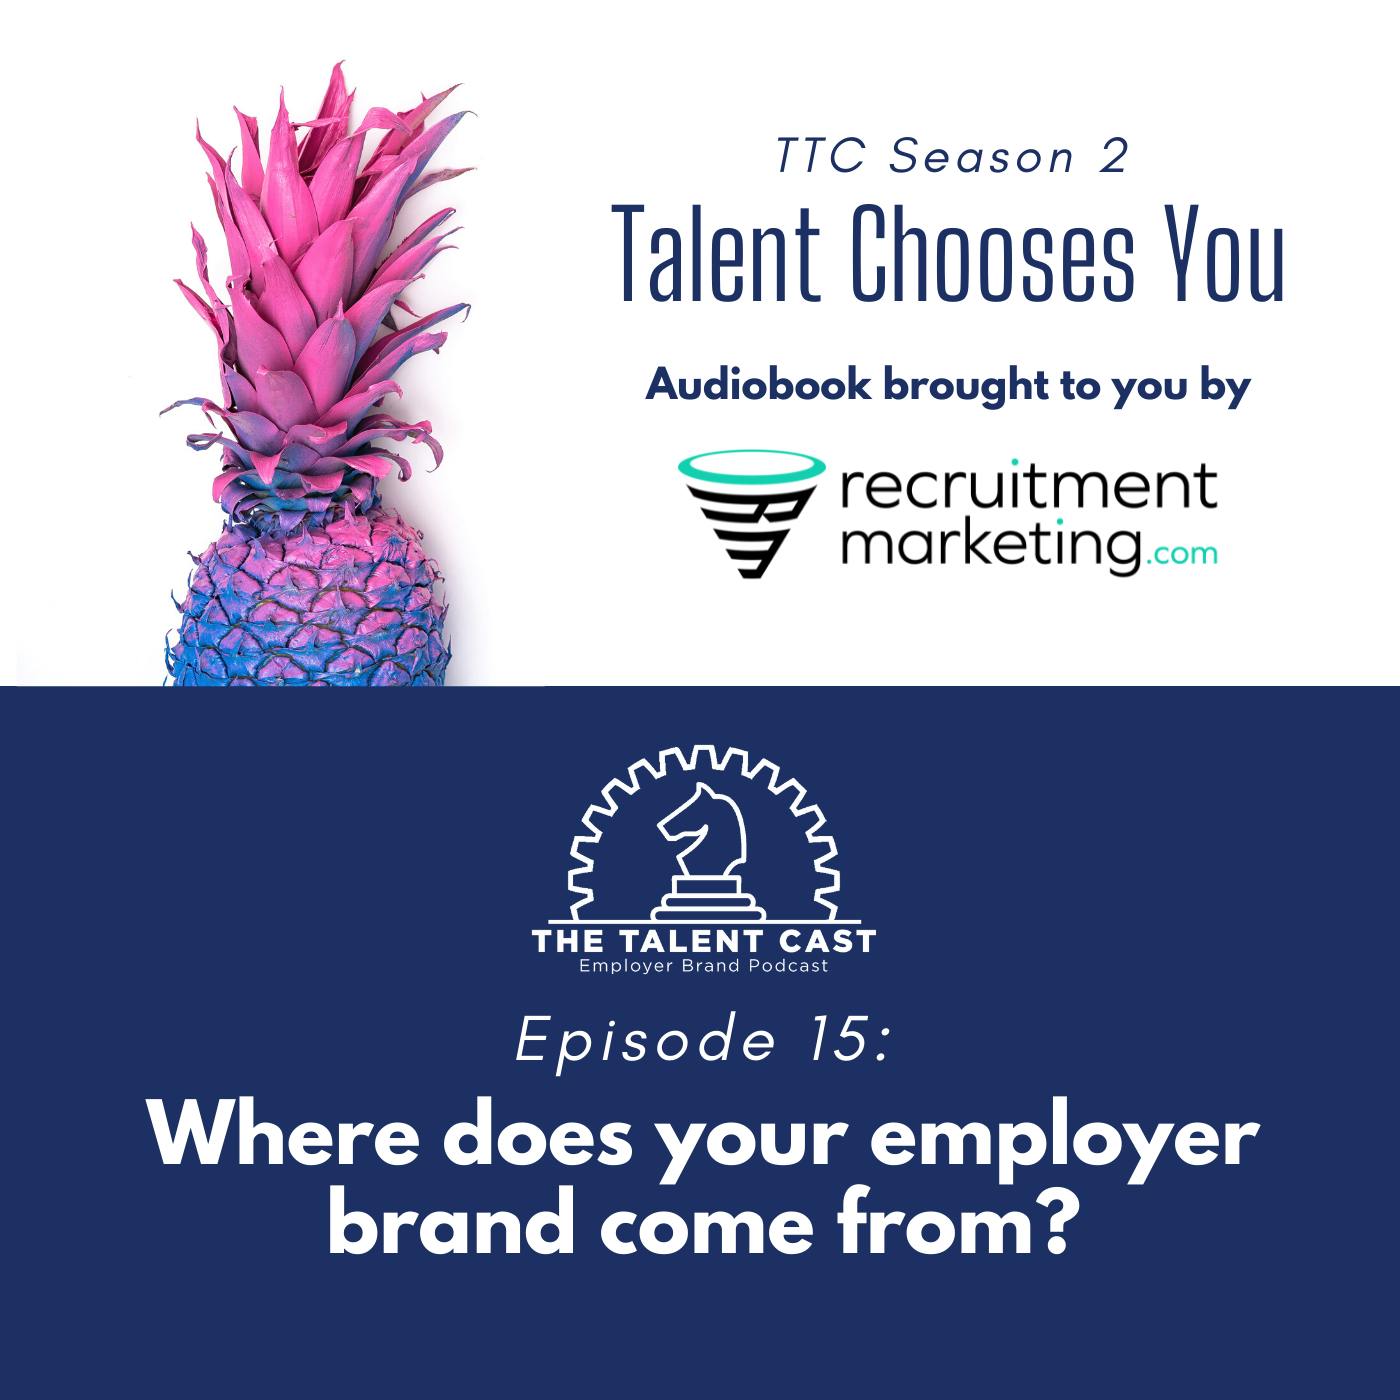 Where does your employer brand come from?